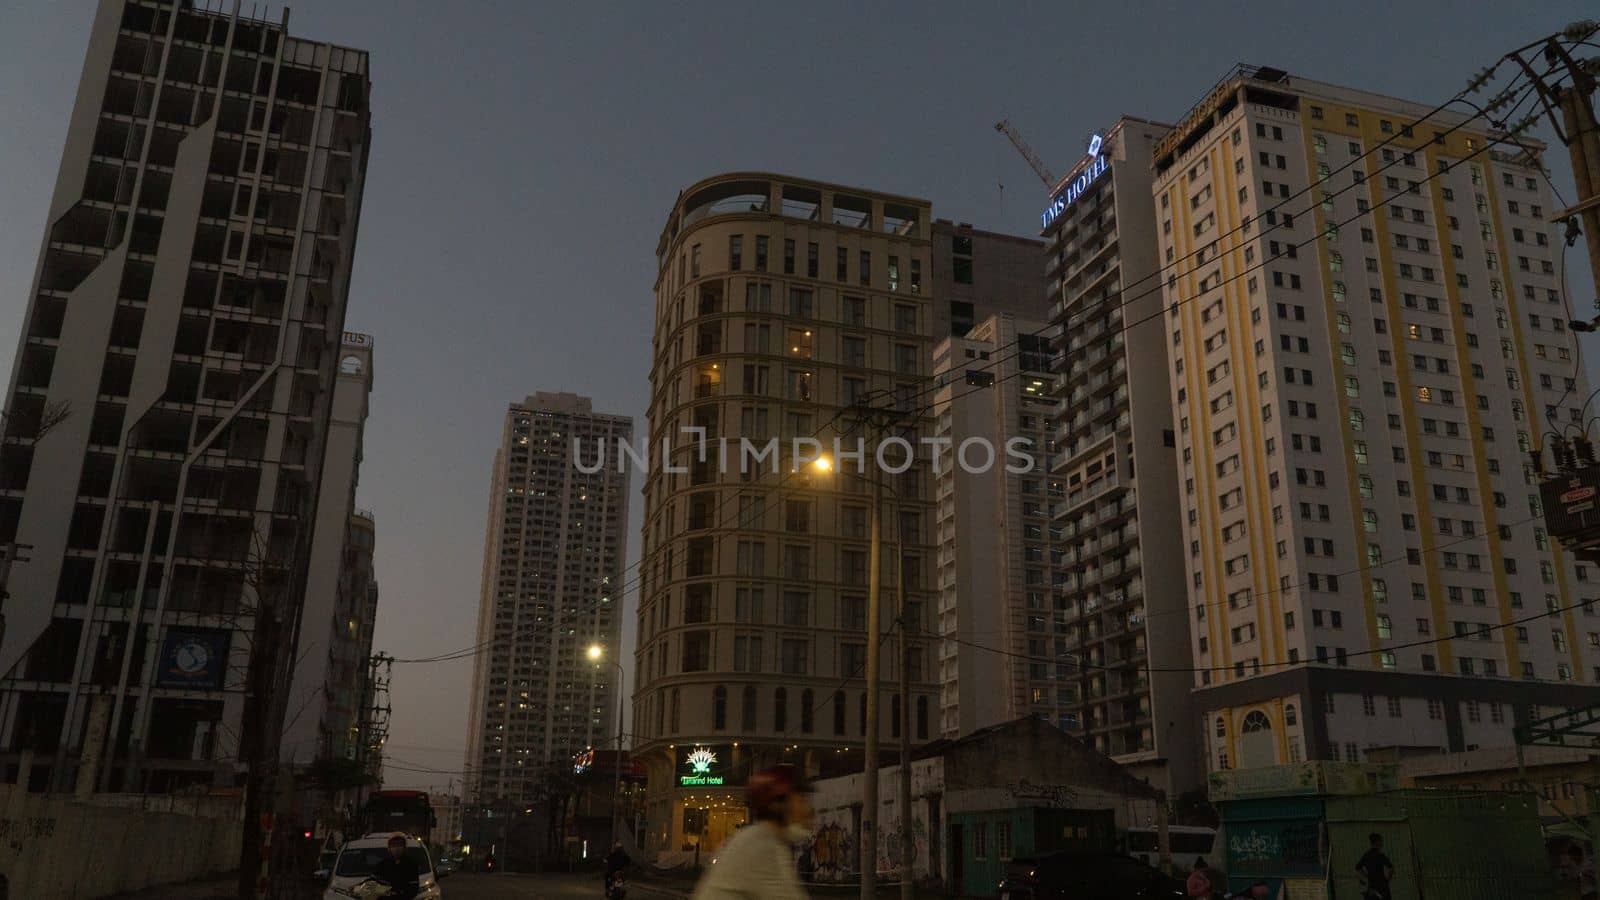 Evening metropolis, a city street in the evening with lanterns. High quality photo